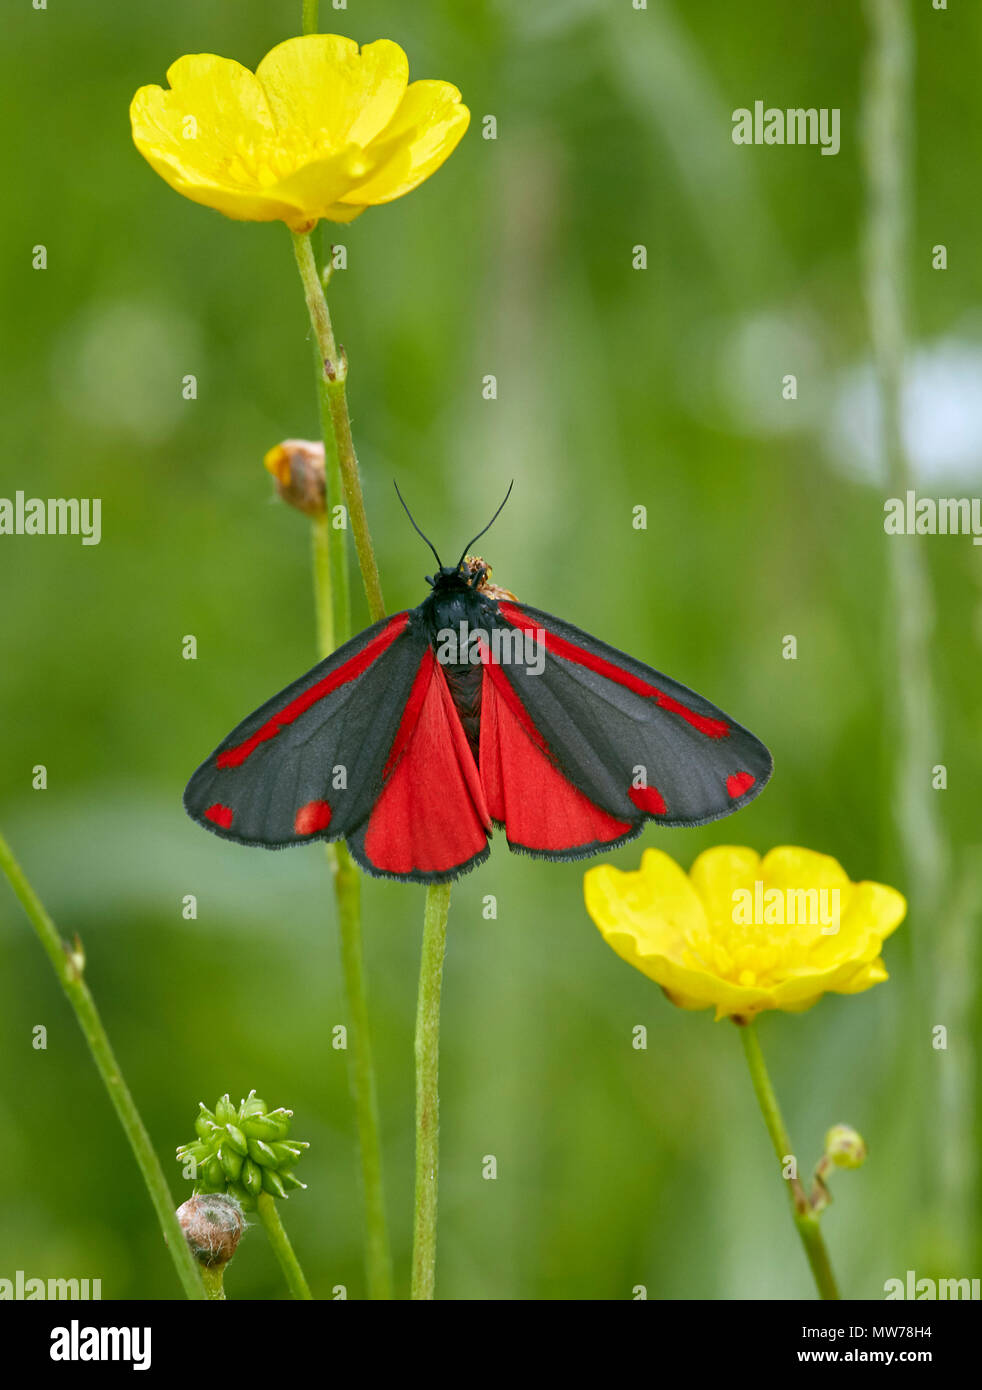 Cinnabar moth sur buttercup. Hurst Meadows, East Molesey, Surrey, Angleterre. Banque D'Images